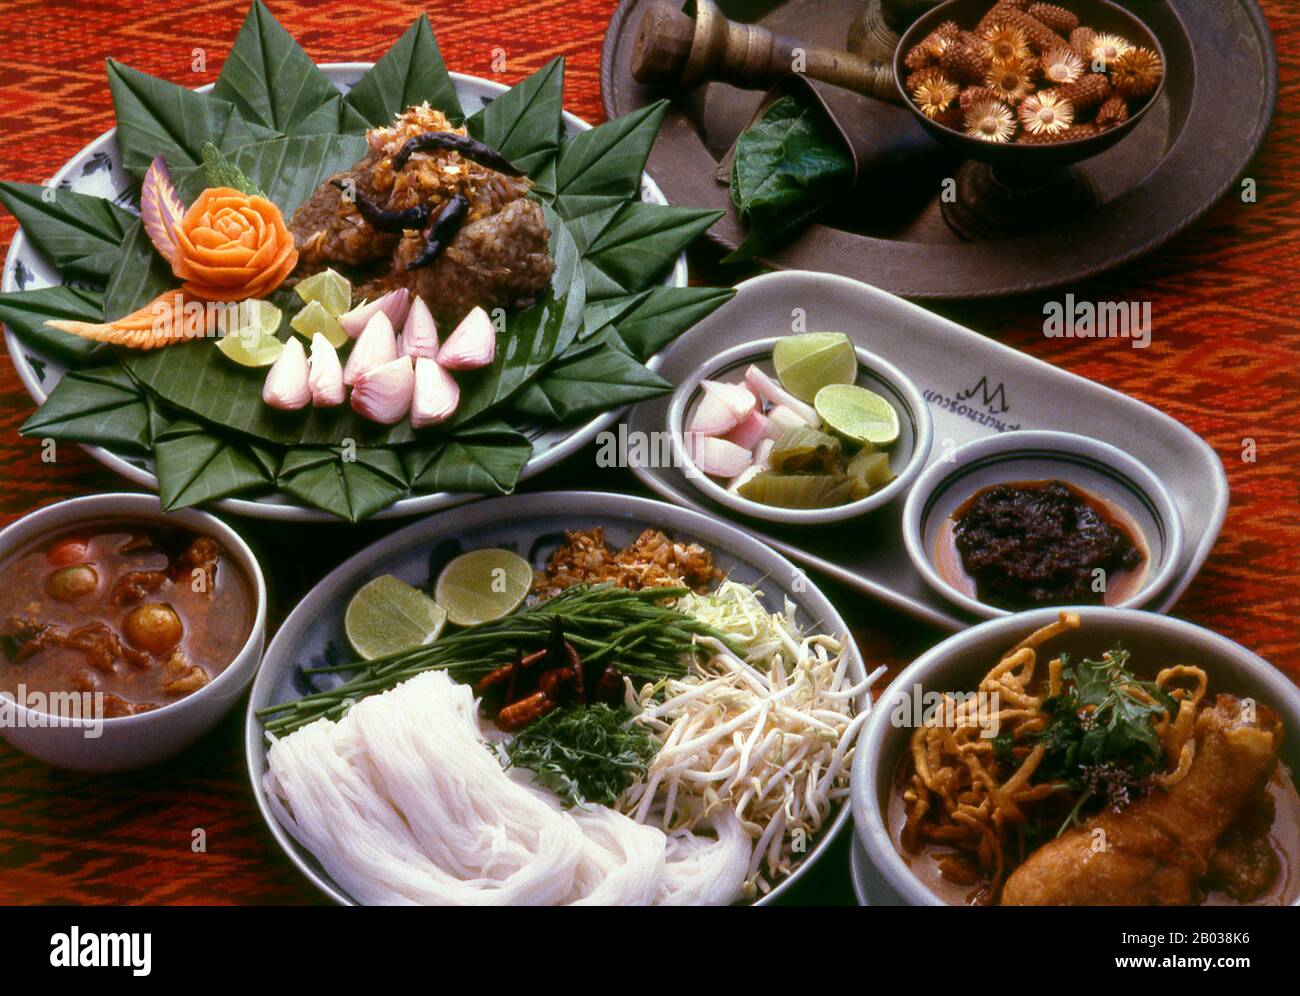 The food of Northern Thailand, like the language, traditional dress and architecture, is quite distinct from that of Bangkok and central Thailand.  Northern Thai cuisine differs from central Thai cuisine in that it is clearly influenced by the traditions of neighbouring Burma, Laos and Yunnan. To begin with, the staple is not khao suai, the soft, fragrant boiled rice of the central plains so familiar to Westerners. Instead, the Khon Muang prefer to eat khao niaw, or glutinous sticky rice. This is steamed, served in tiny wicker baskets, and eaten with the fingers along with a selection of  spic Stock Photo